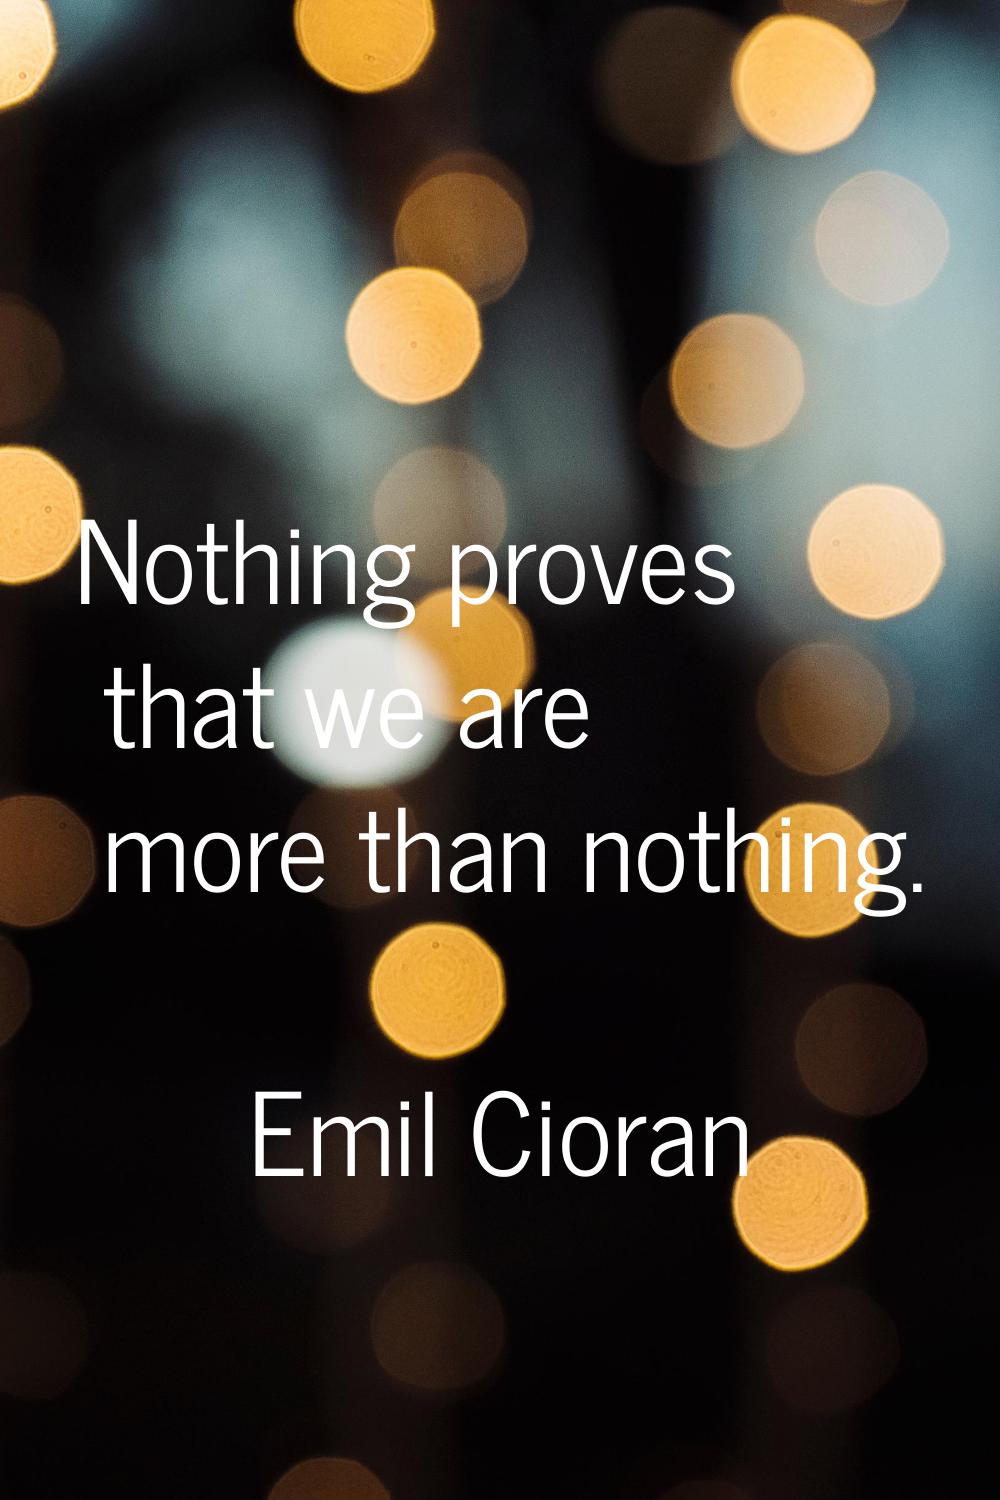 Nothing proves that we are more than nothing.